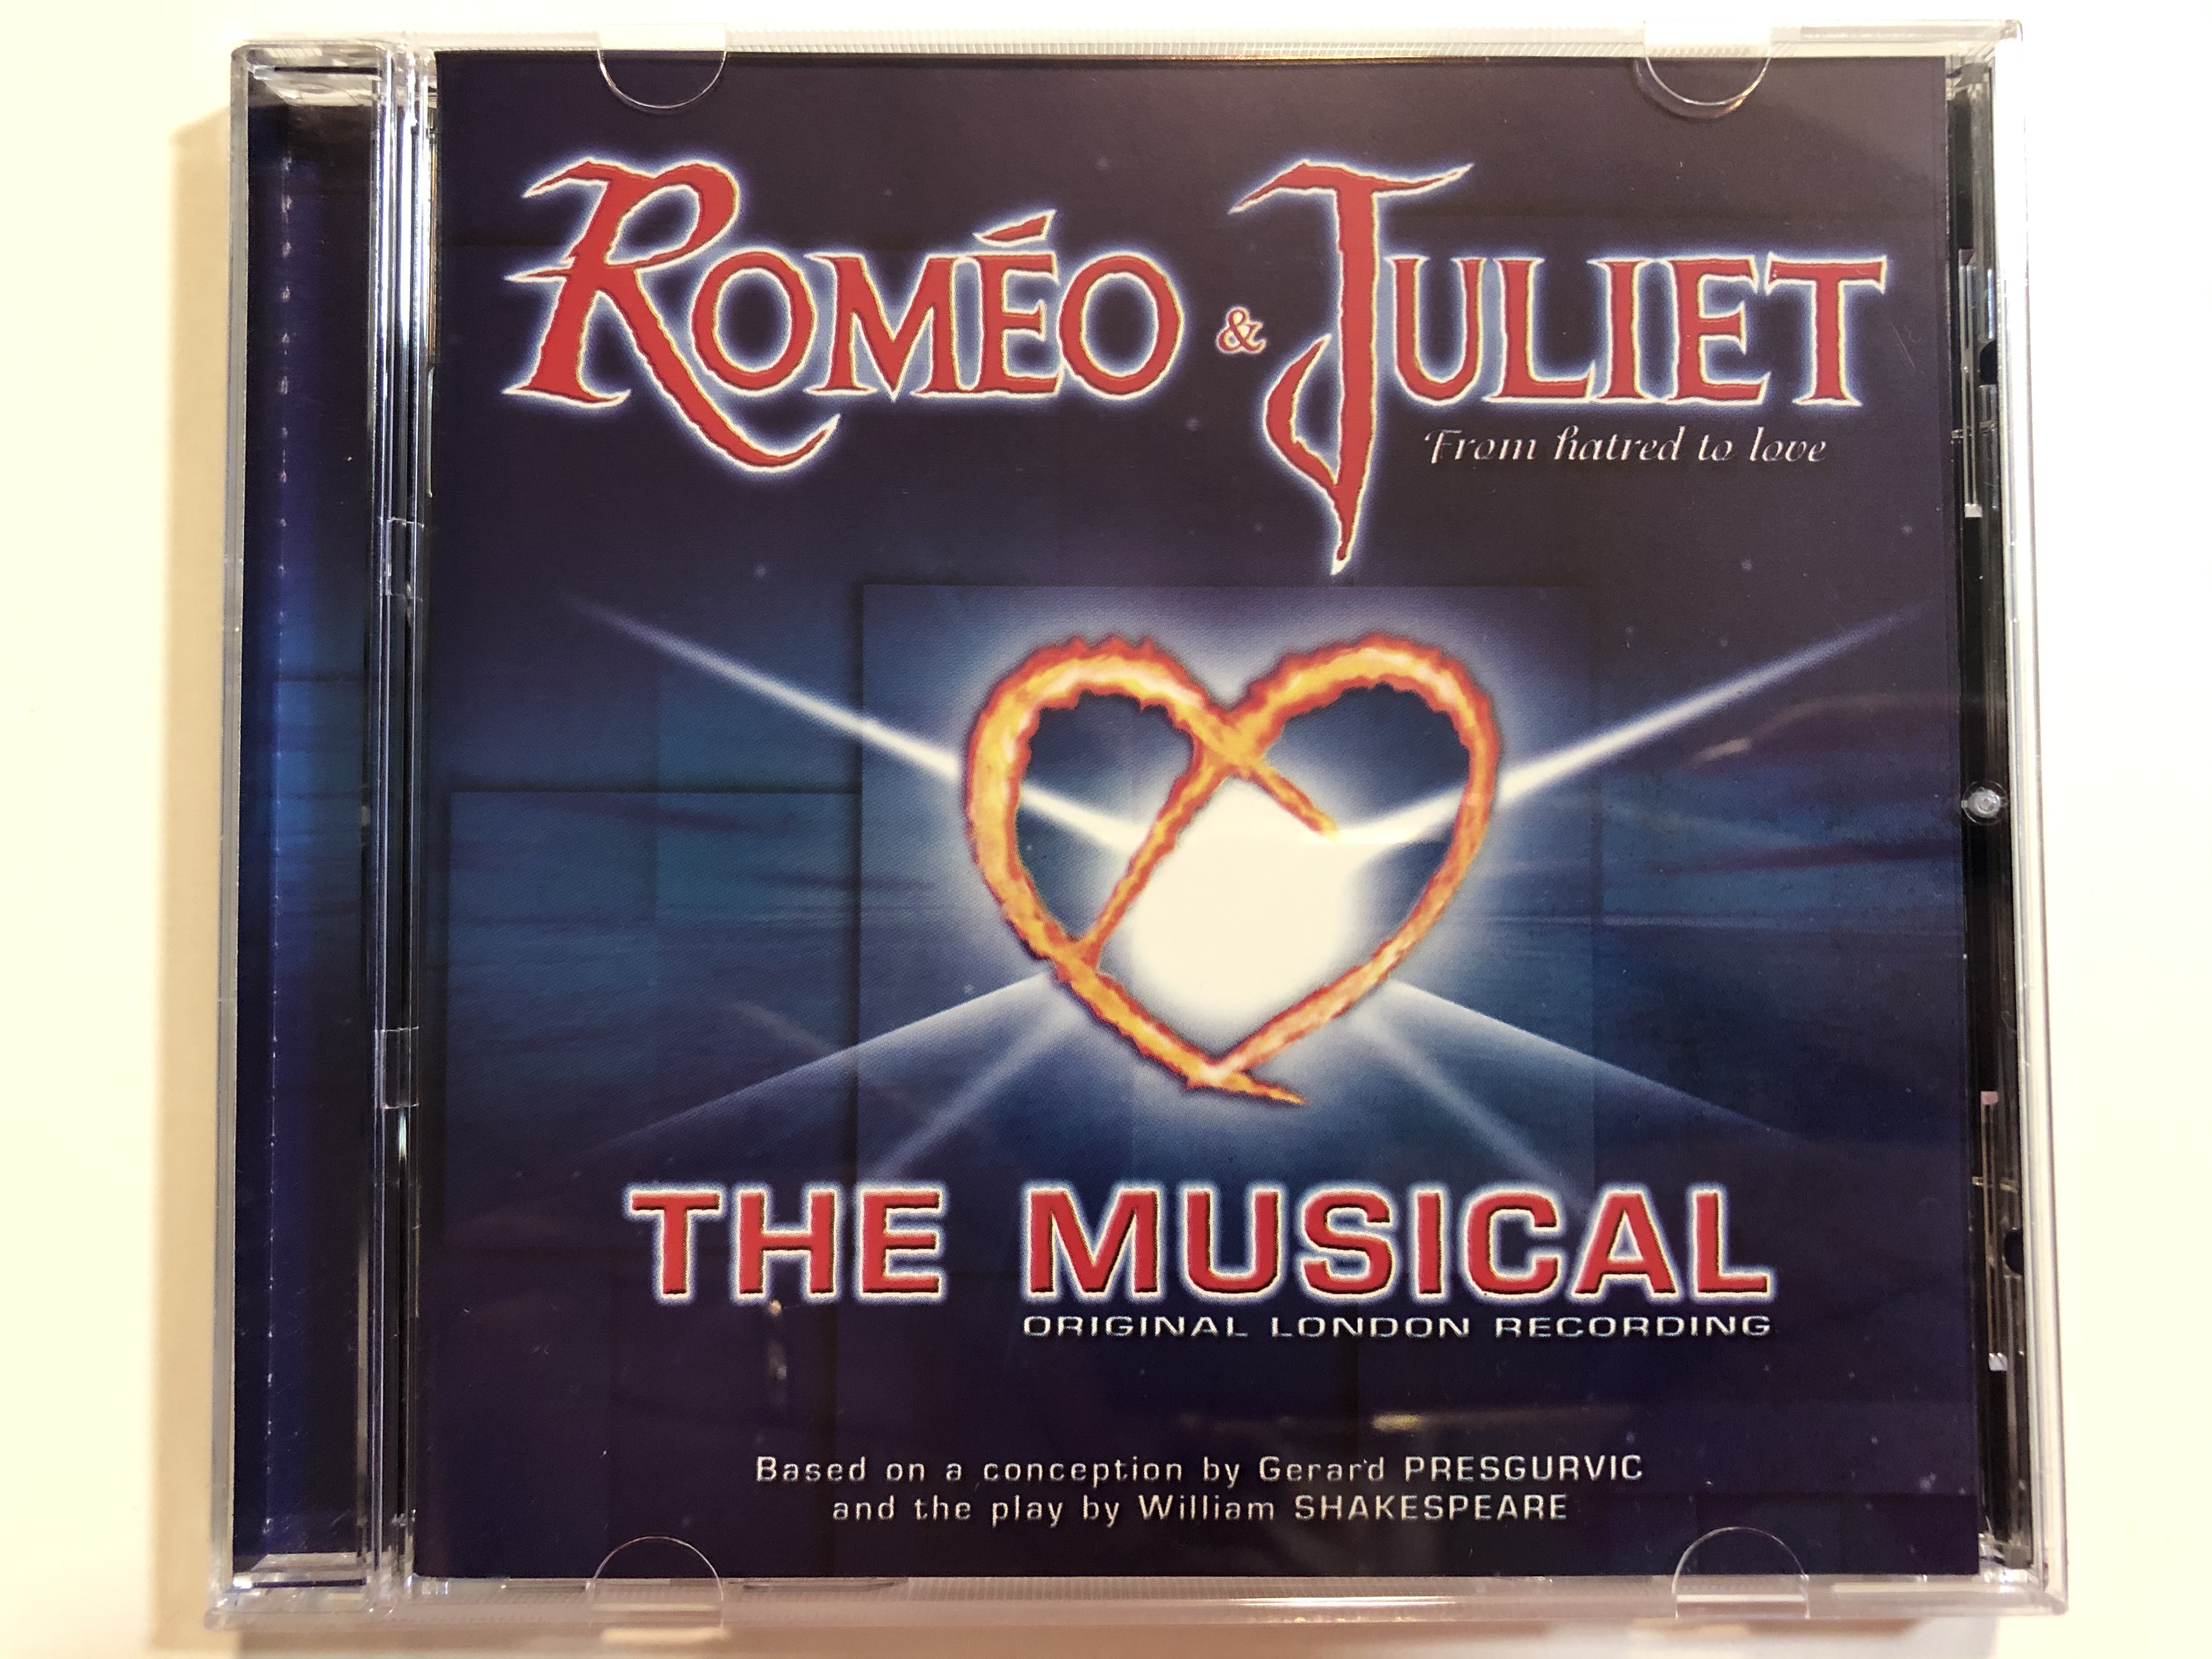 rom-o-juliet-from-hatred-to-love-the-musical-original-london-cast-recording-based-on-a-conception-by-gerard-presgurvic-and-the-play-by-william-shakespeare-universal-audio-cd-2003-0044-1-.jpg